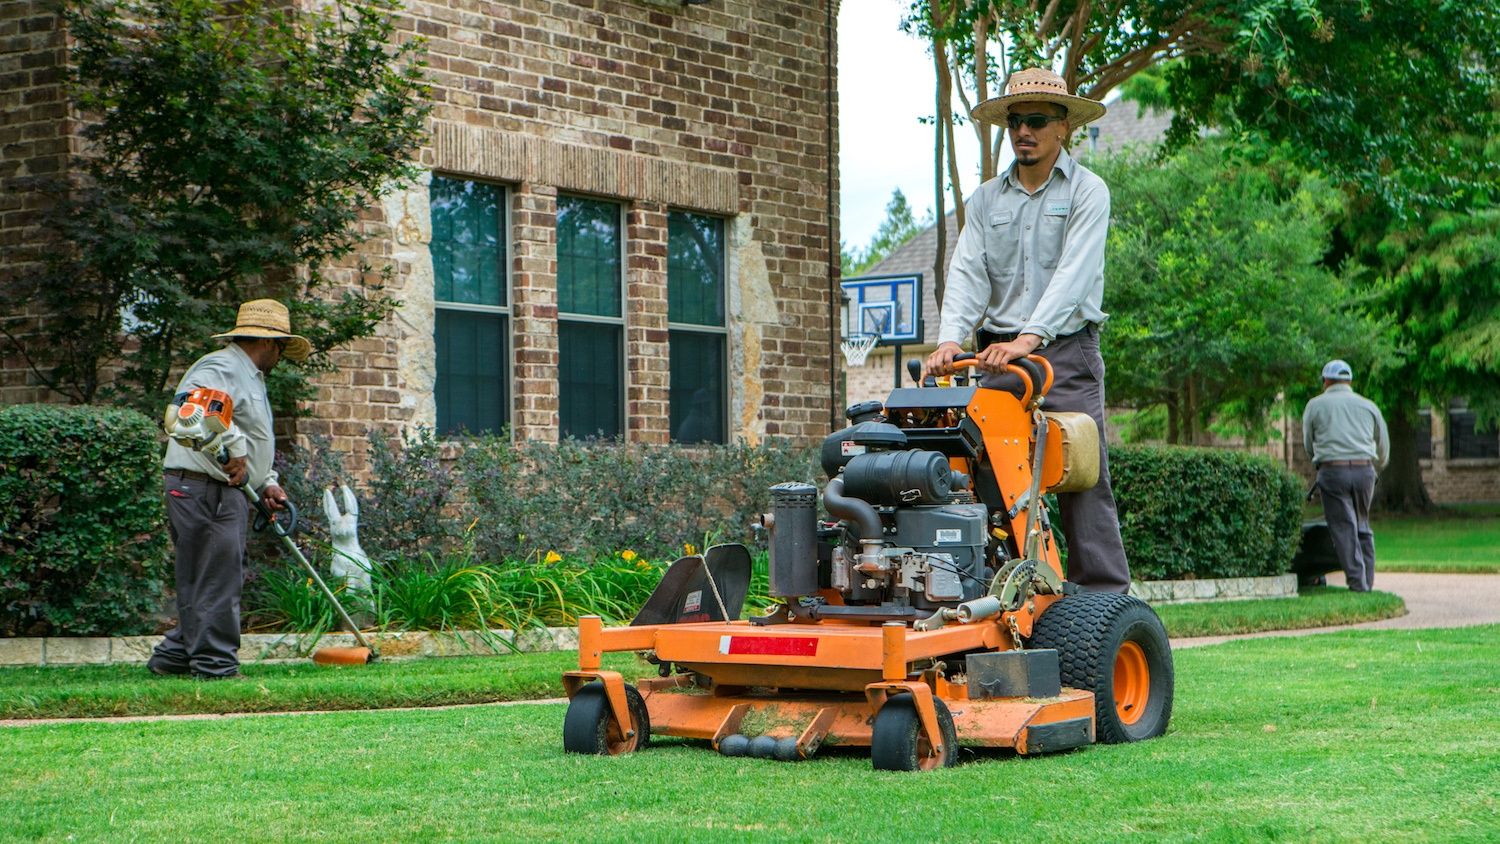 Landscaping and maintenance jobs